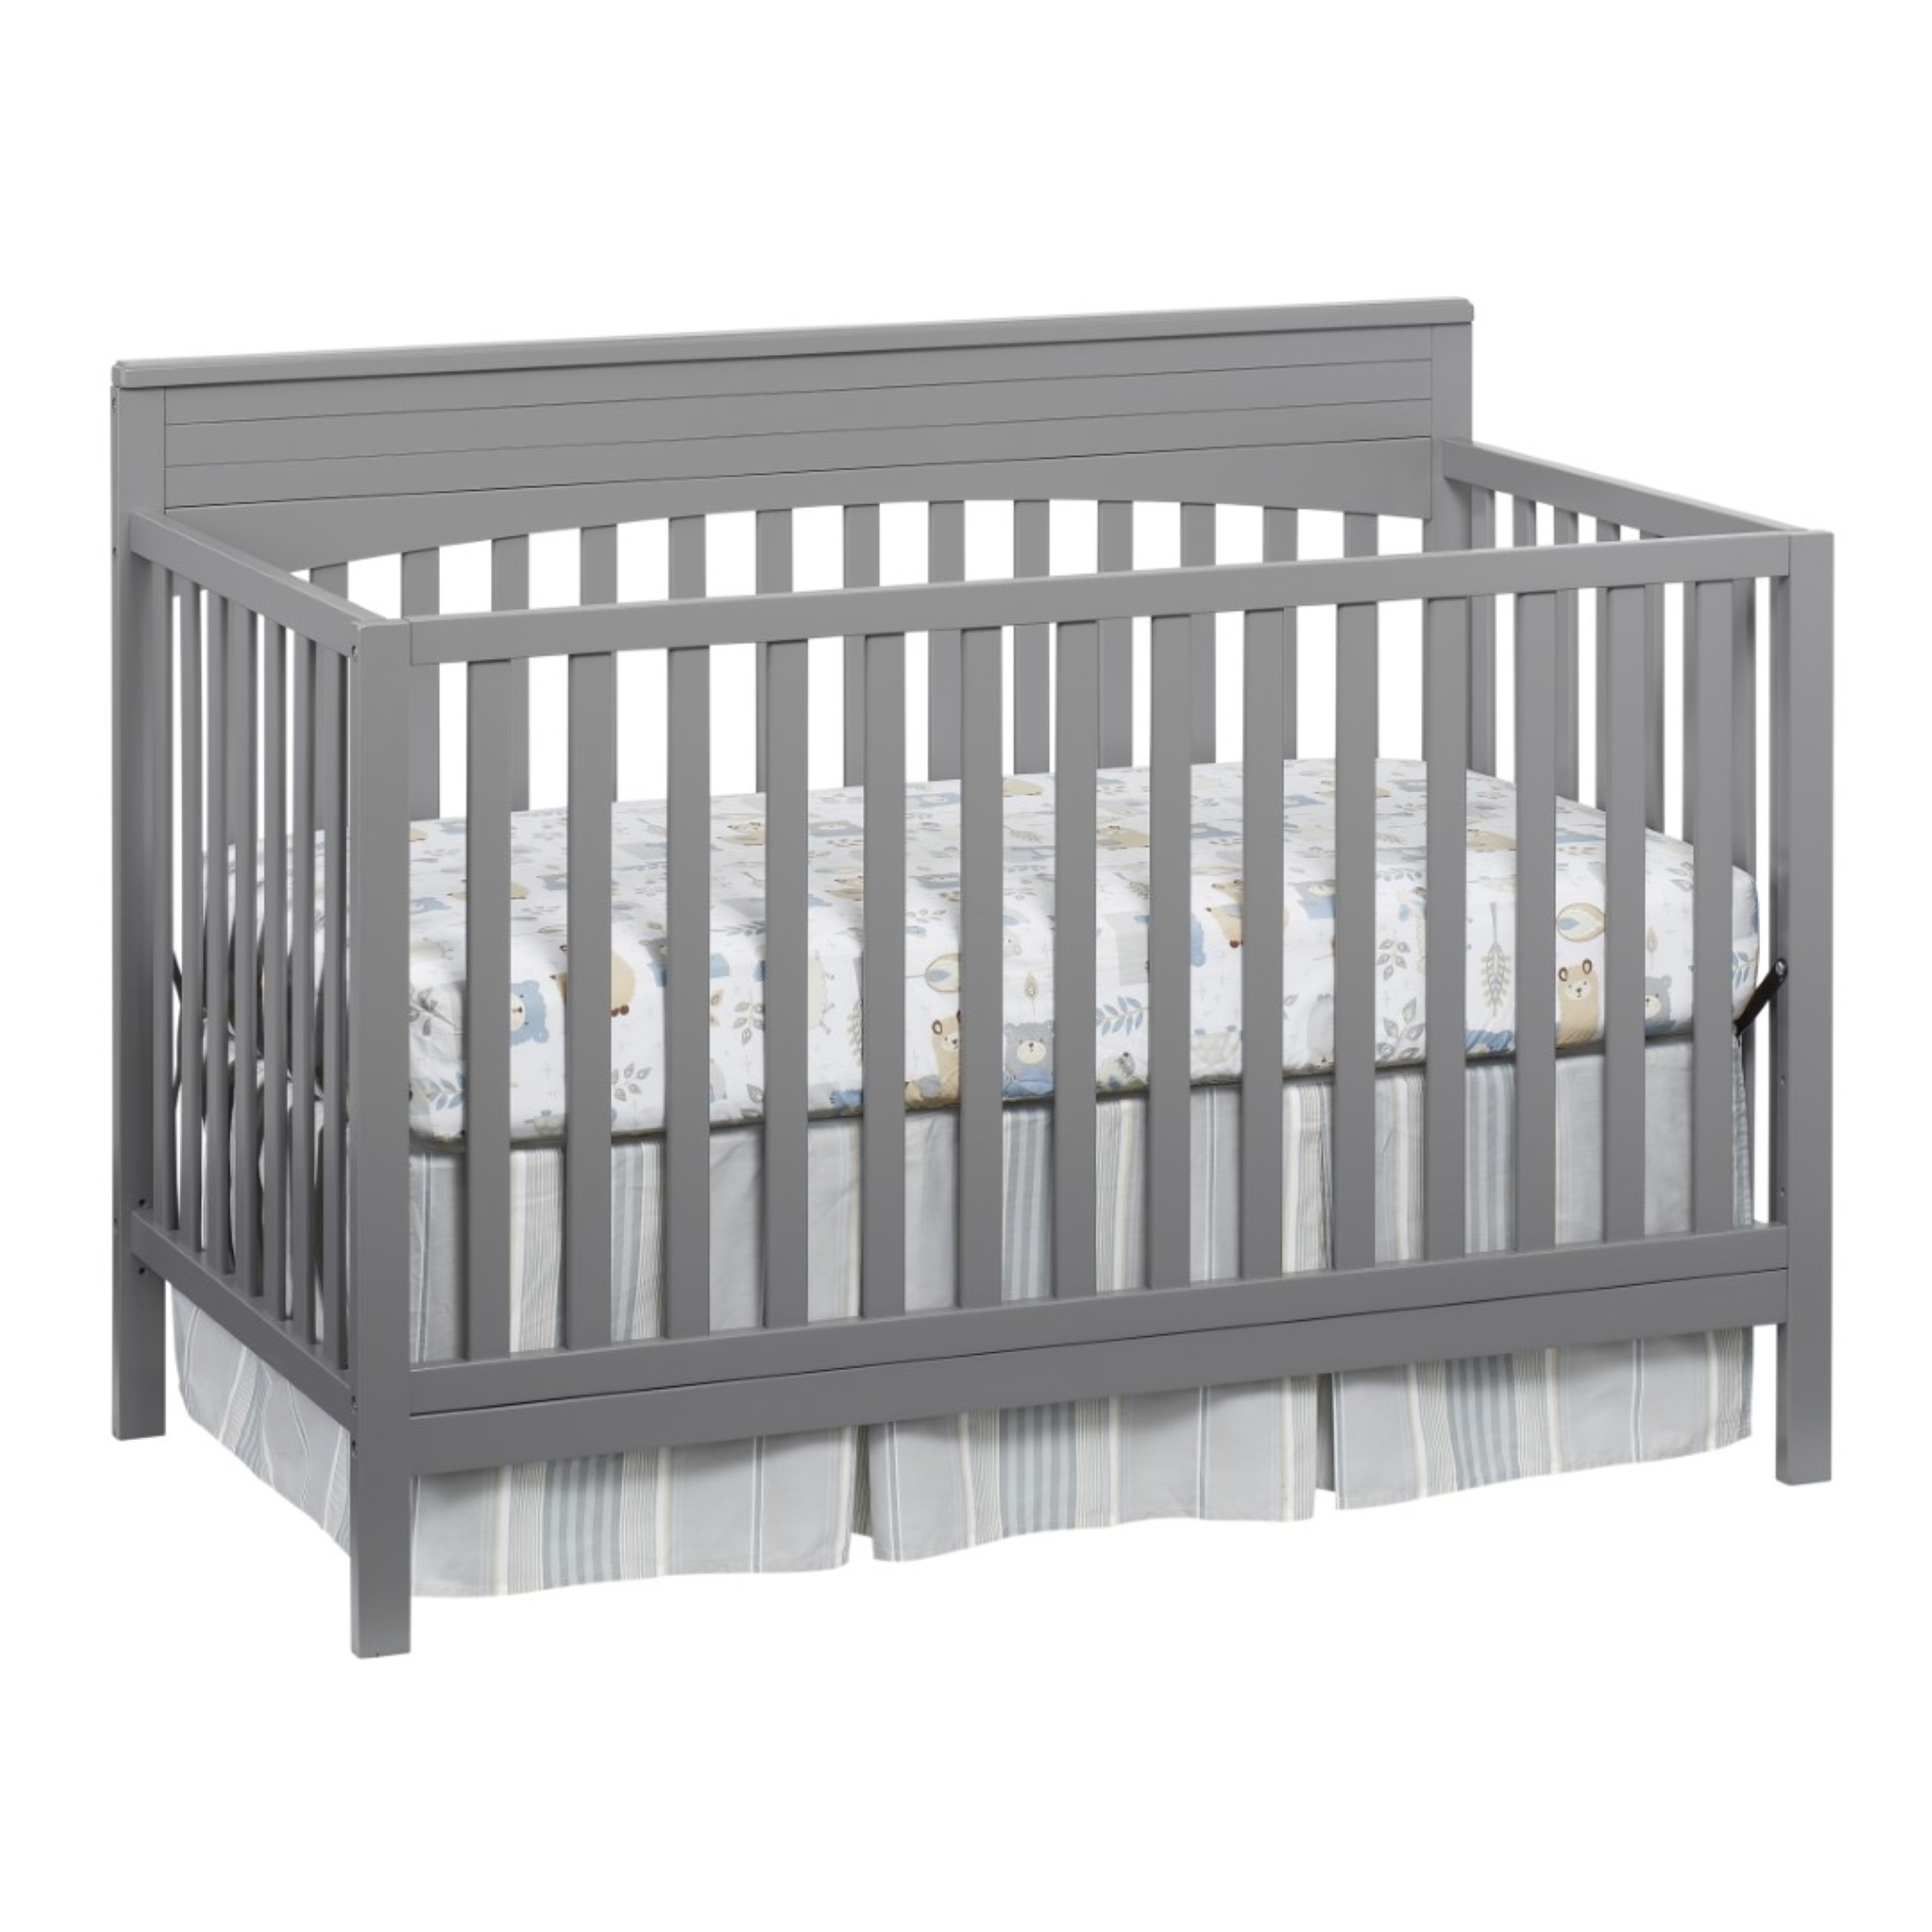 Oxford Baby Harper 4-in-1 Convertible Crib, Dove Gray, GREENGUARD Gold Certified, Wooden Crib - image 5 of 11